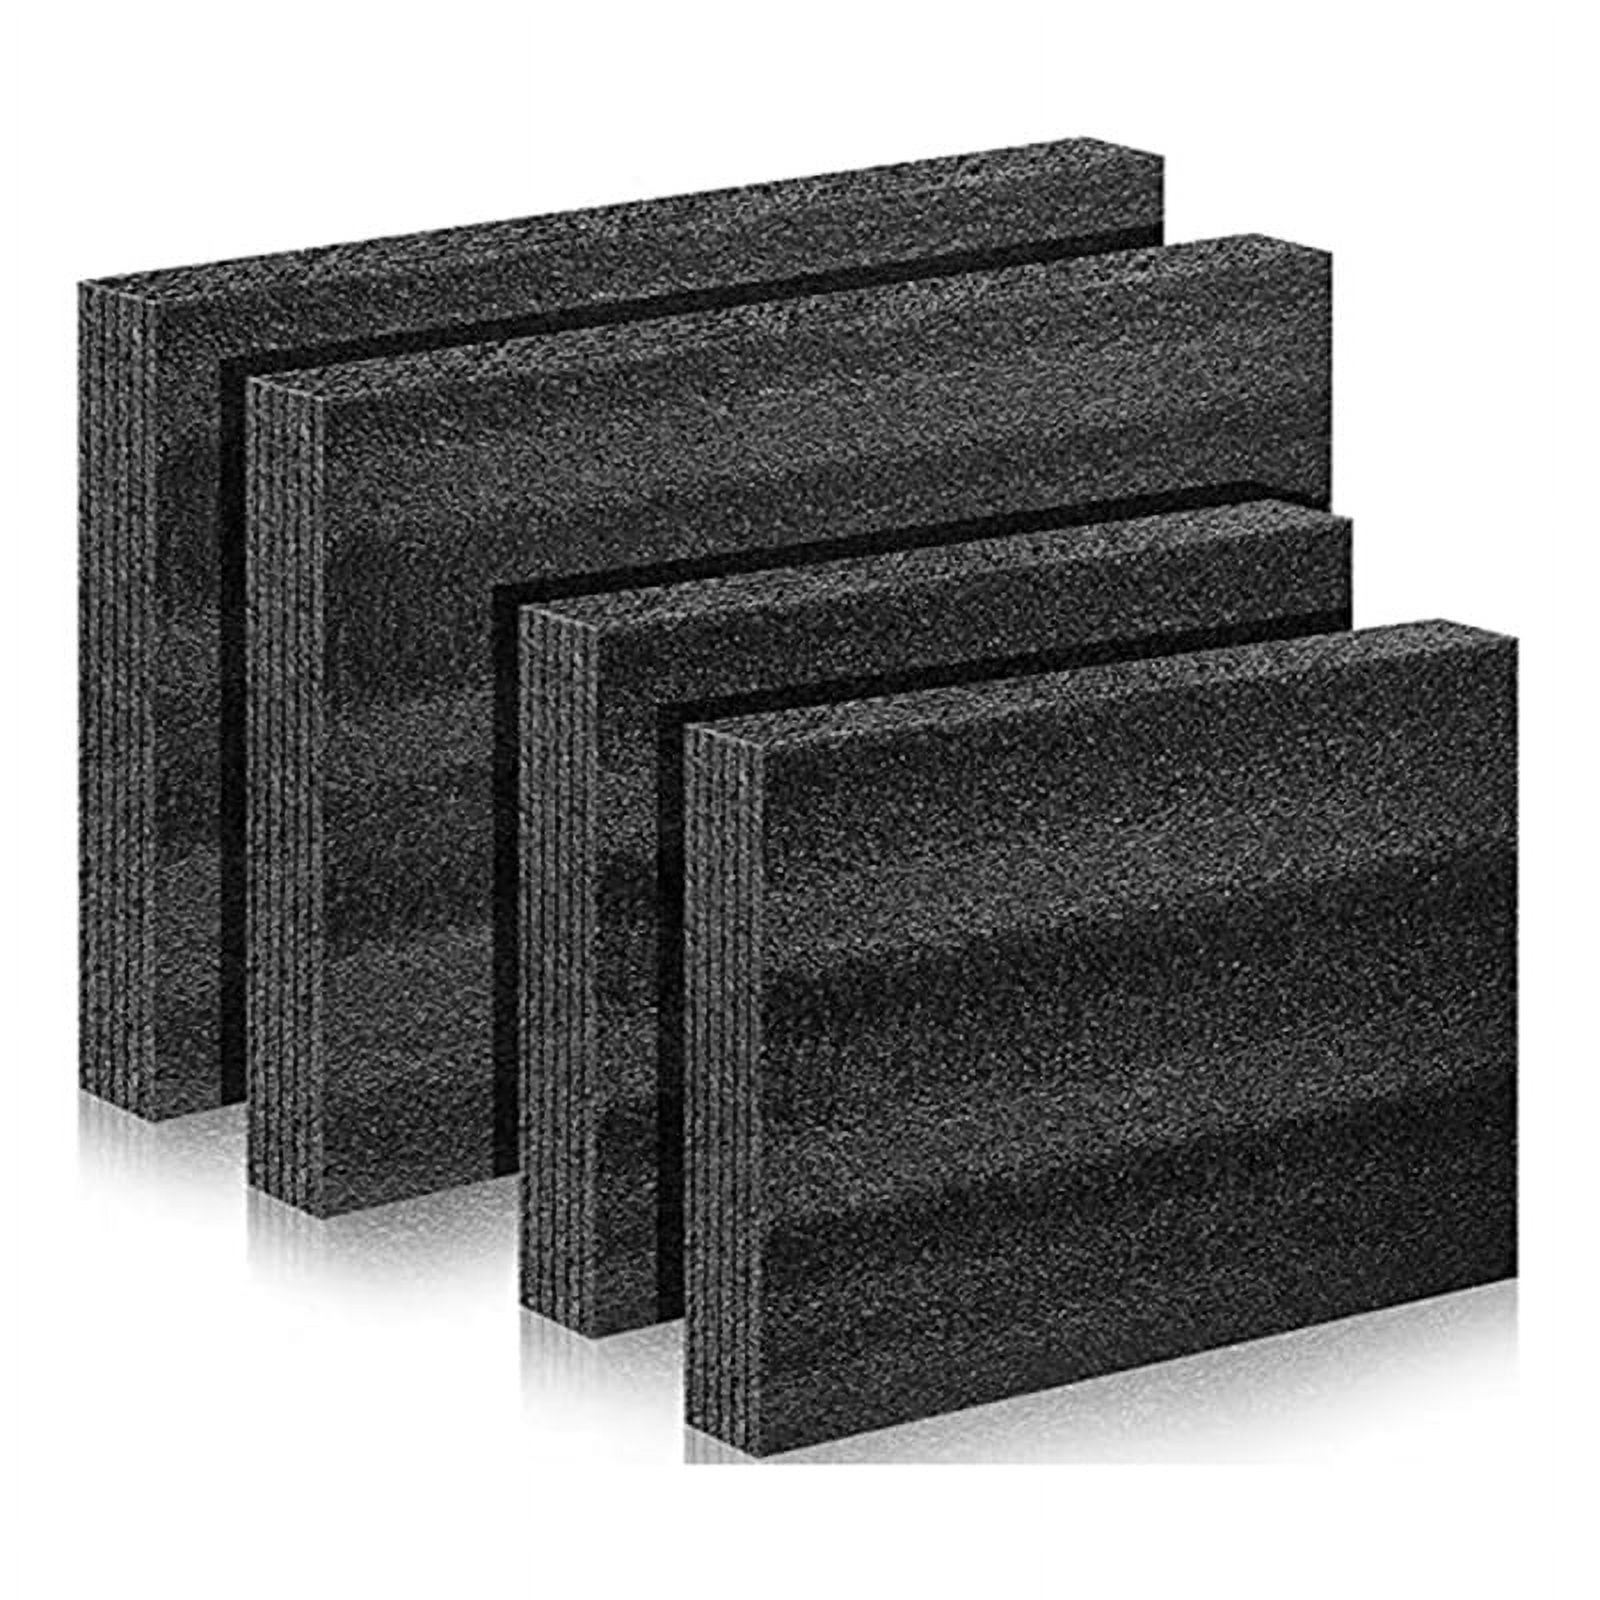 Yaomiao 3 Sheets Customizable Polyethylene Foam 54 x 16 x 2 Thick Black  Packing Foam Inserts for Cases Thick Polyethylene Foam Sheet for Packaging